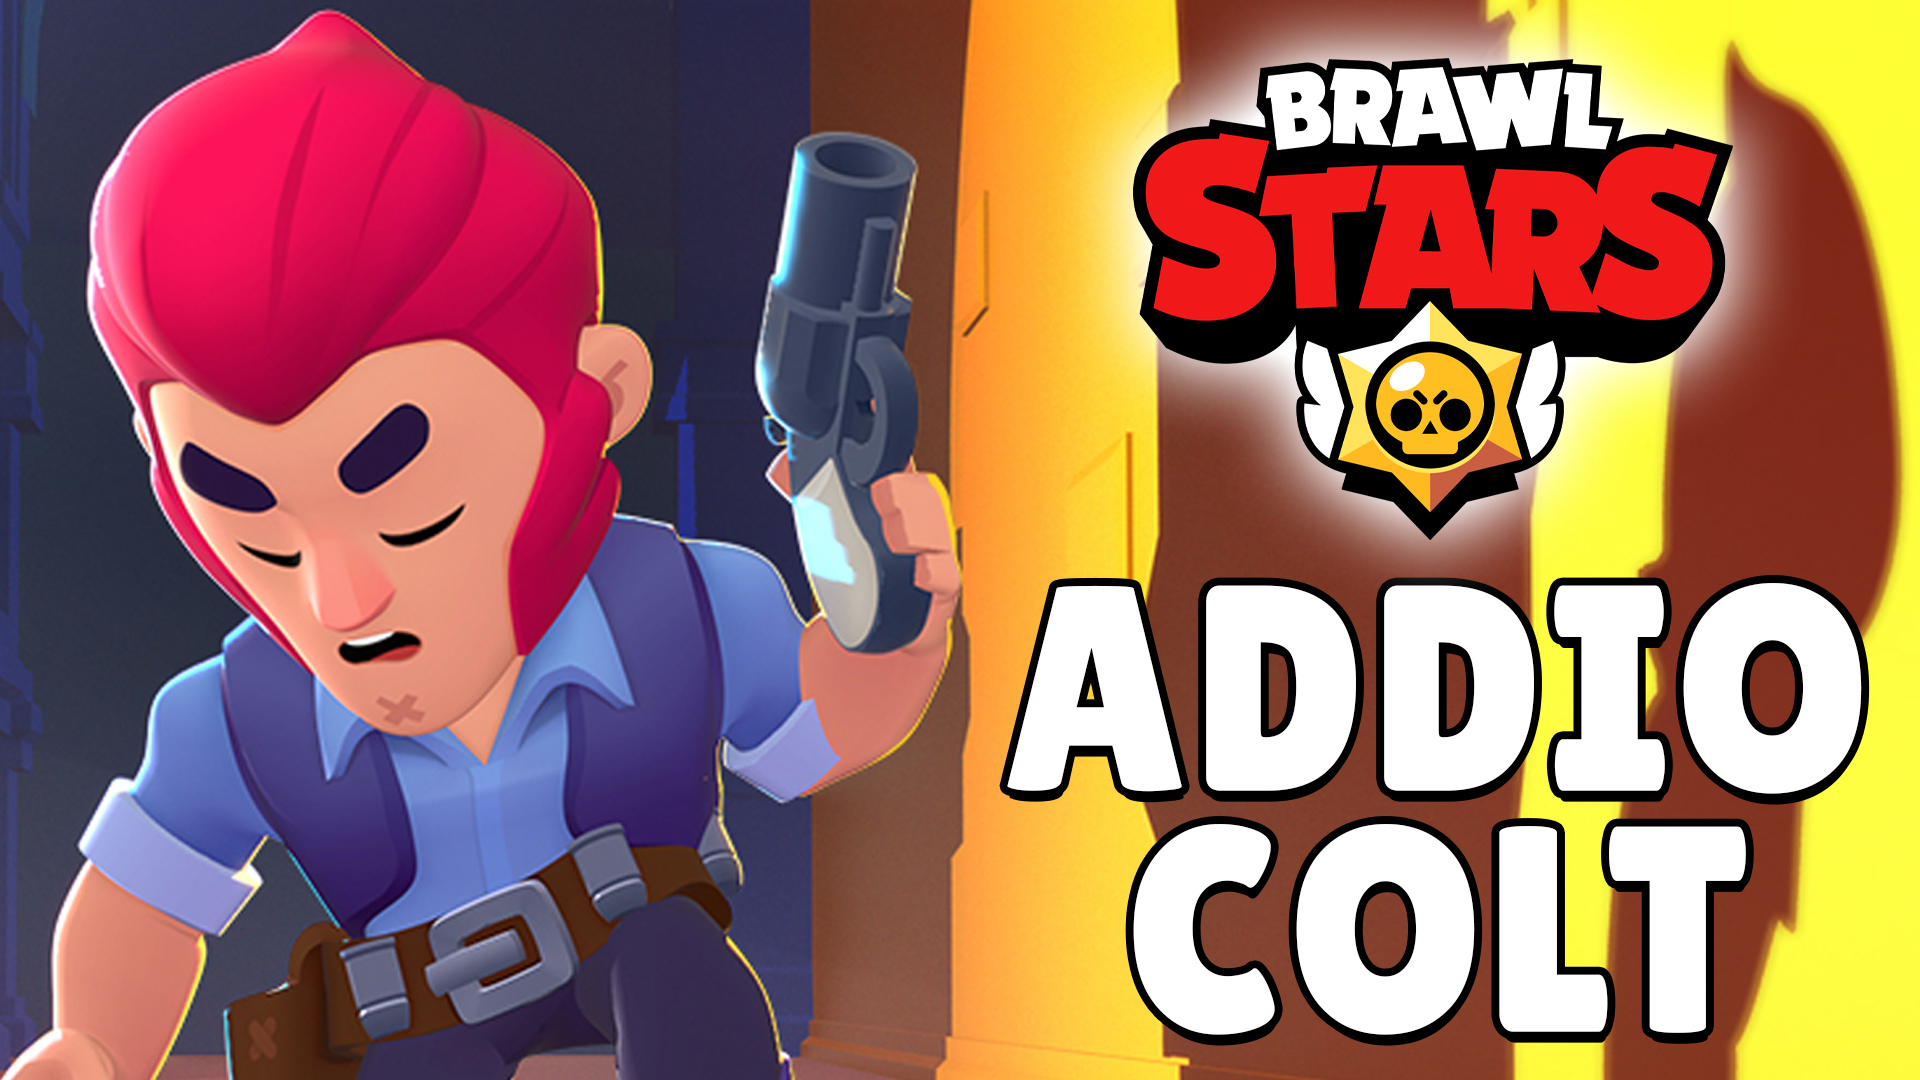 Balance Changes And Bad News For Bea Colt And Edgar - brawl stars balance changes may